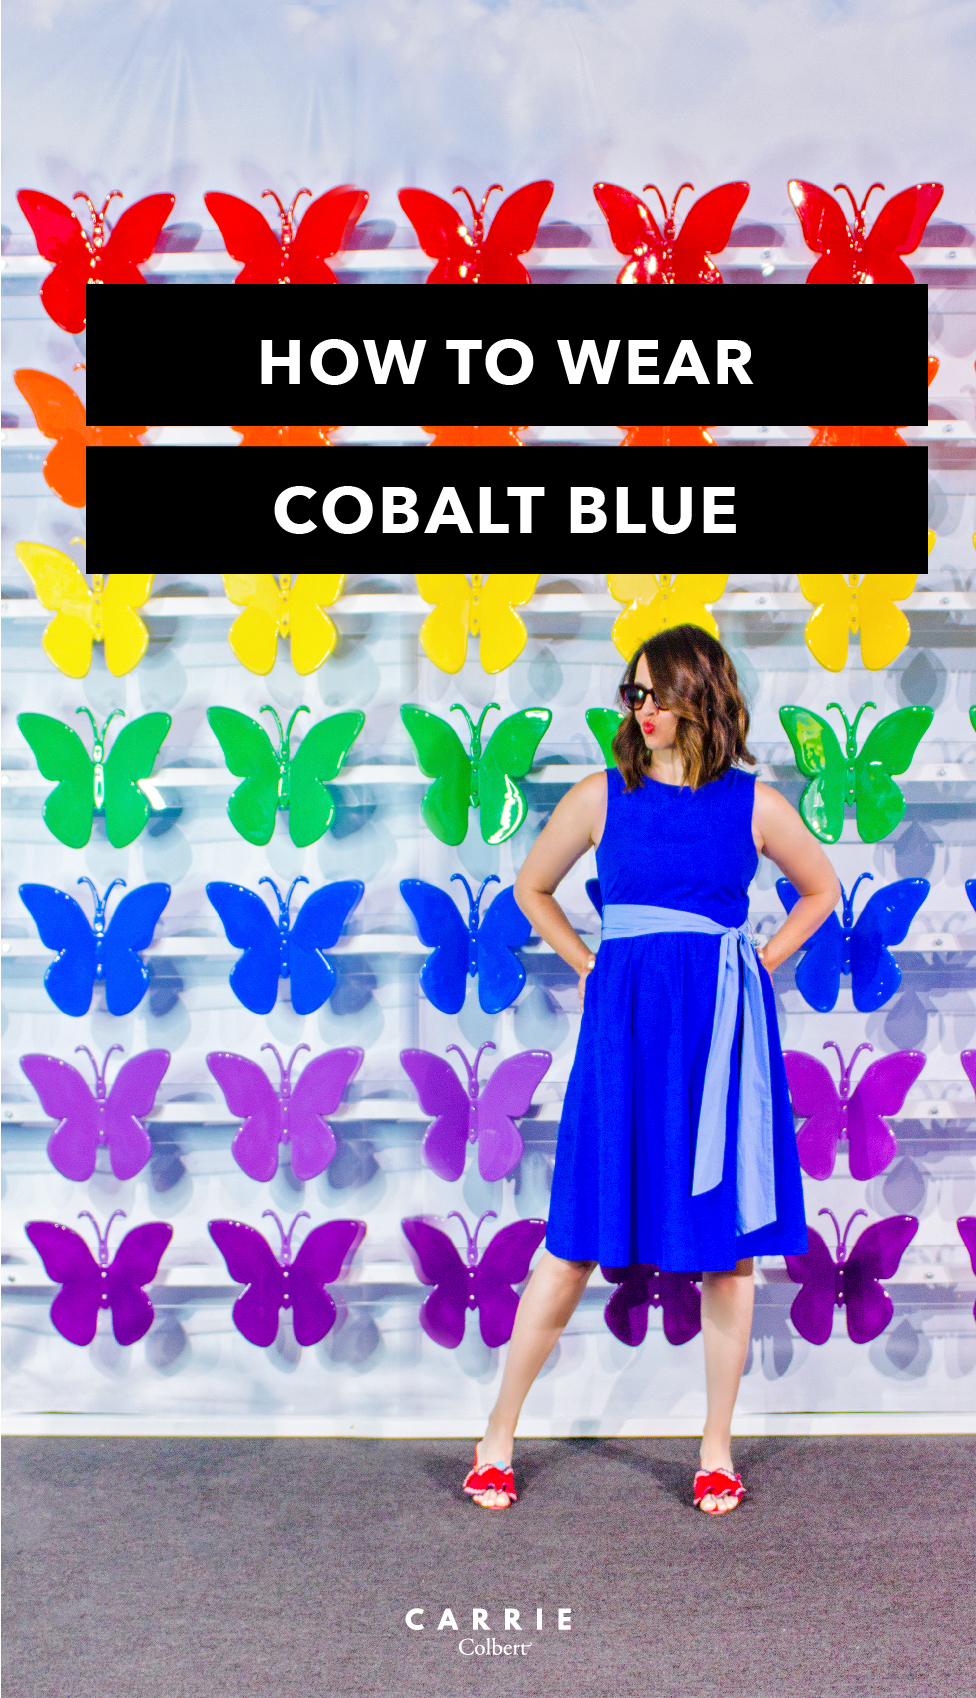 How to Wear - Carrie Colbert